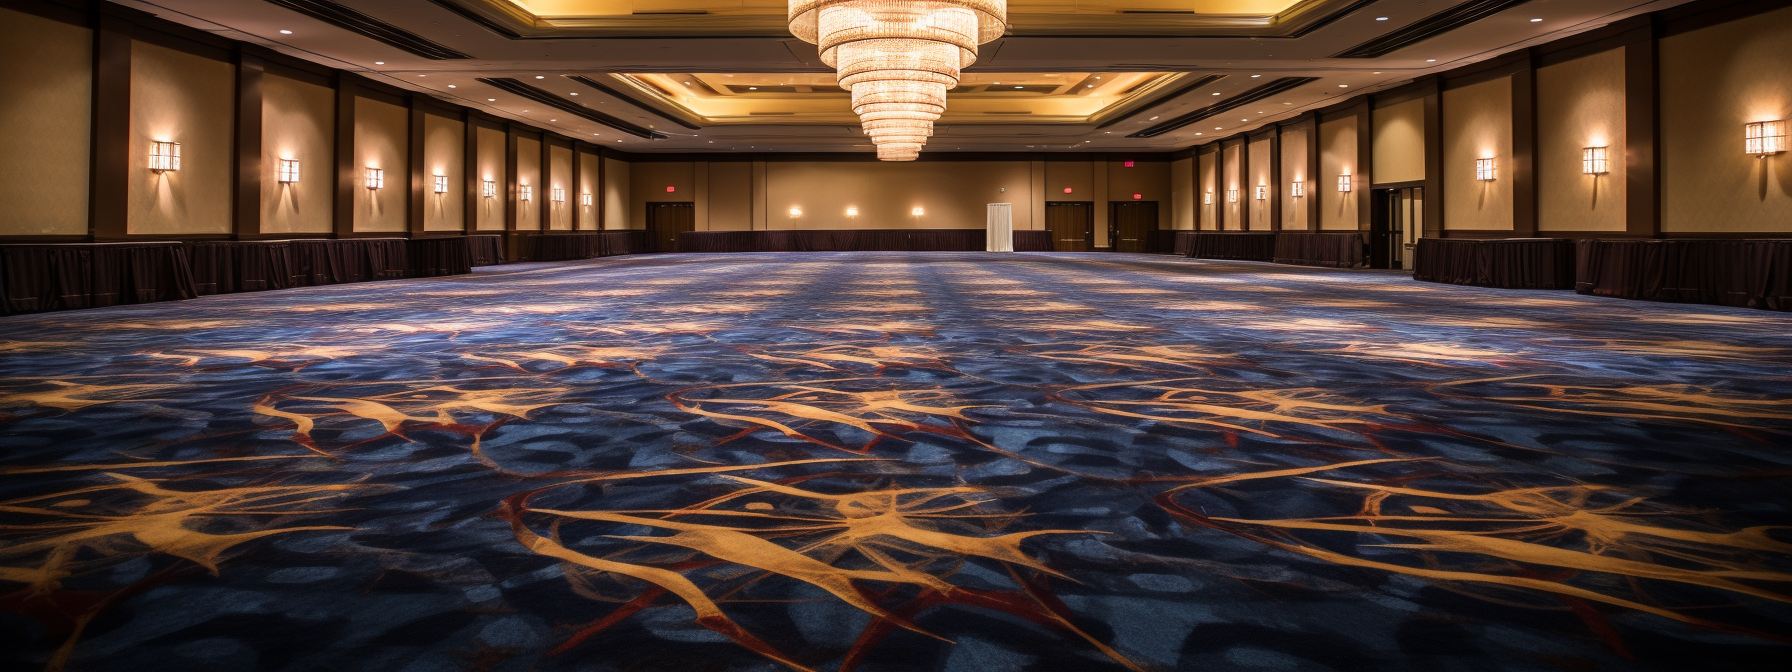 Choosing the Best Carpet Material for Durability and Ease of Care